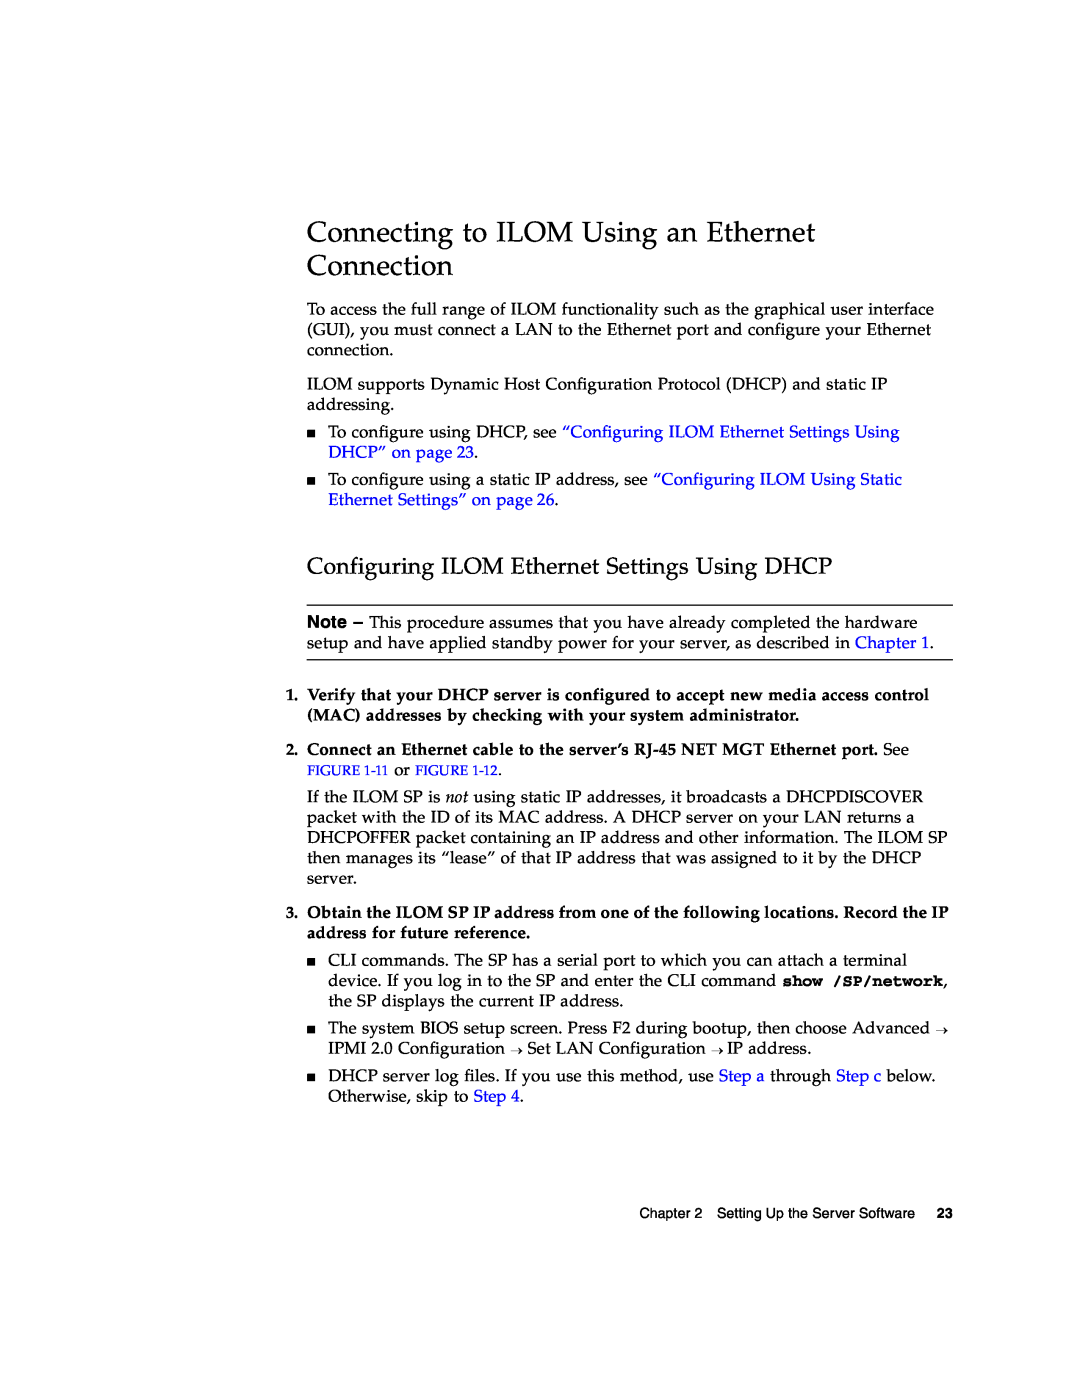 Sun Microsystems X4200 Connecting to ILOM Using an Ethernet Connection, Configuring ILOM Ethernet Settings Using DHCP 